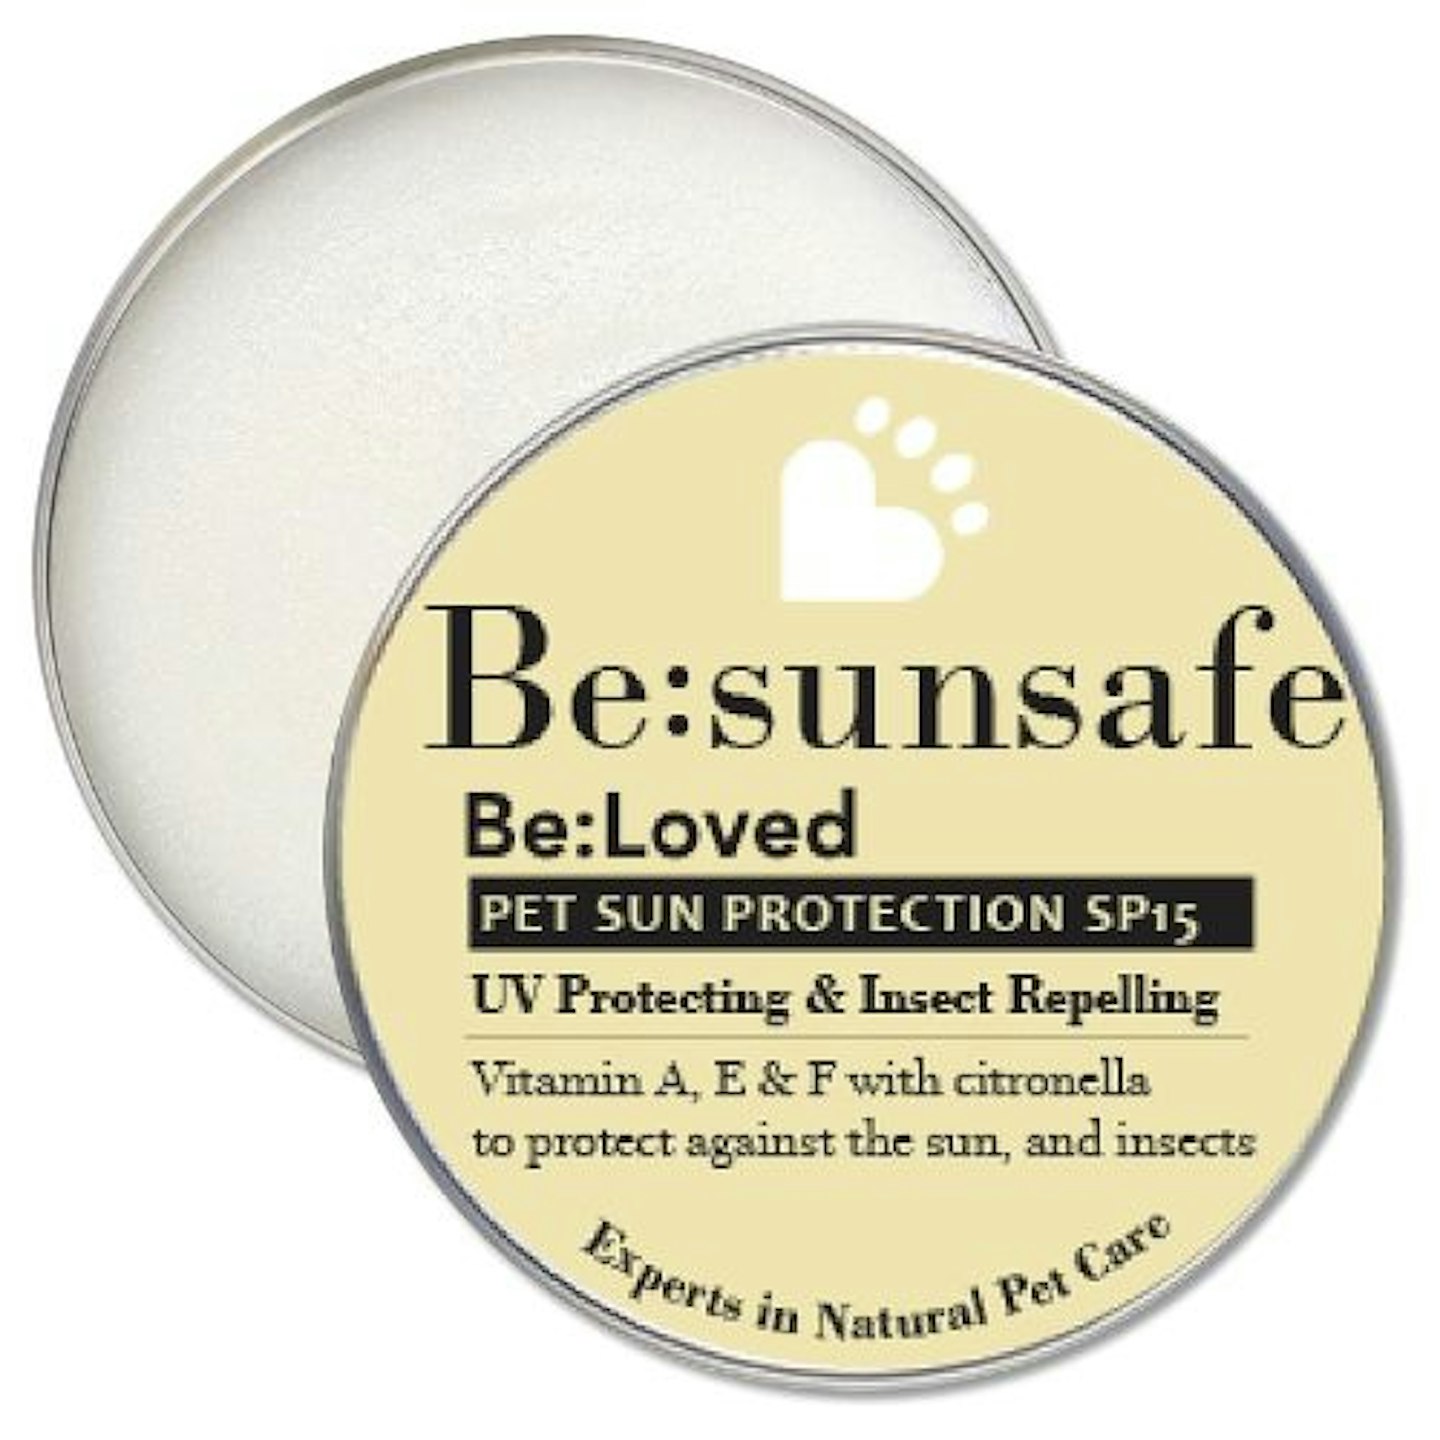 Be:sun Sun Protection Balm for Pets